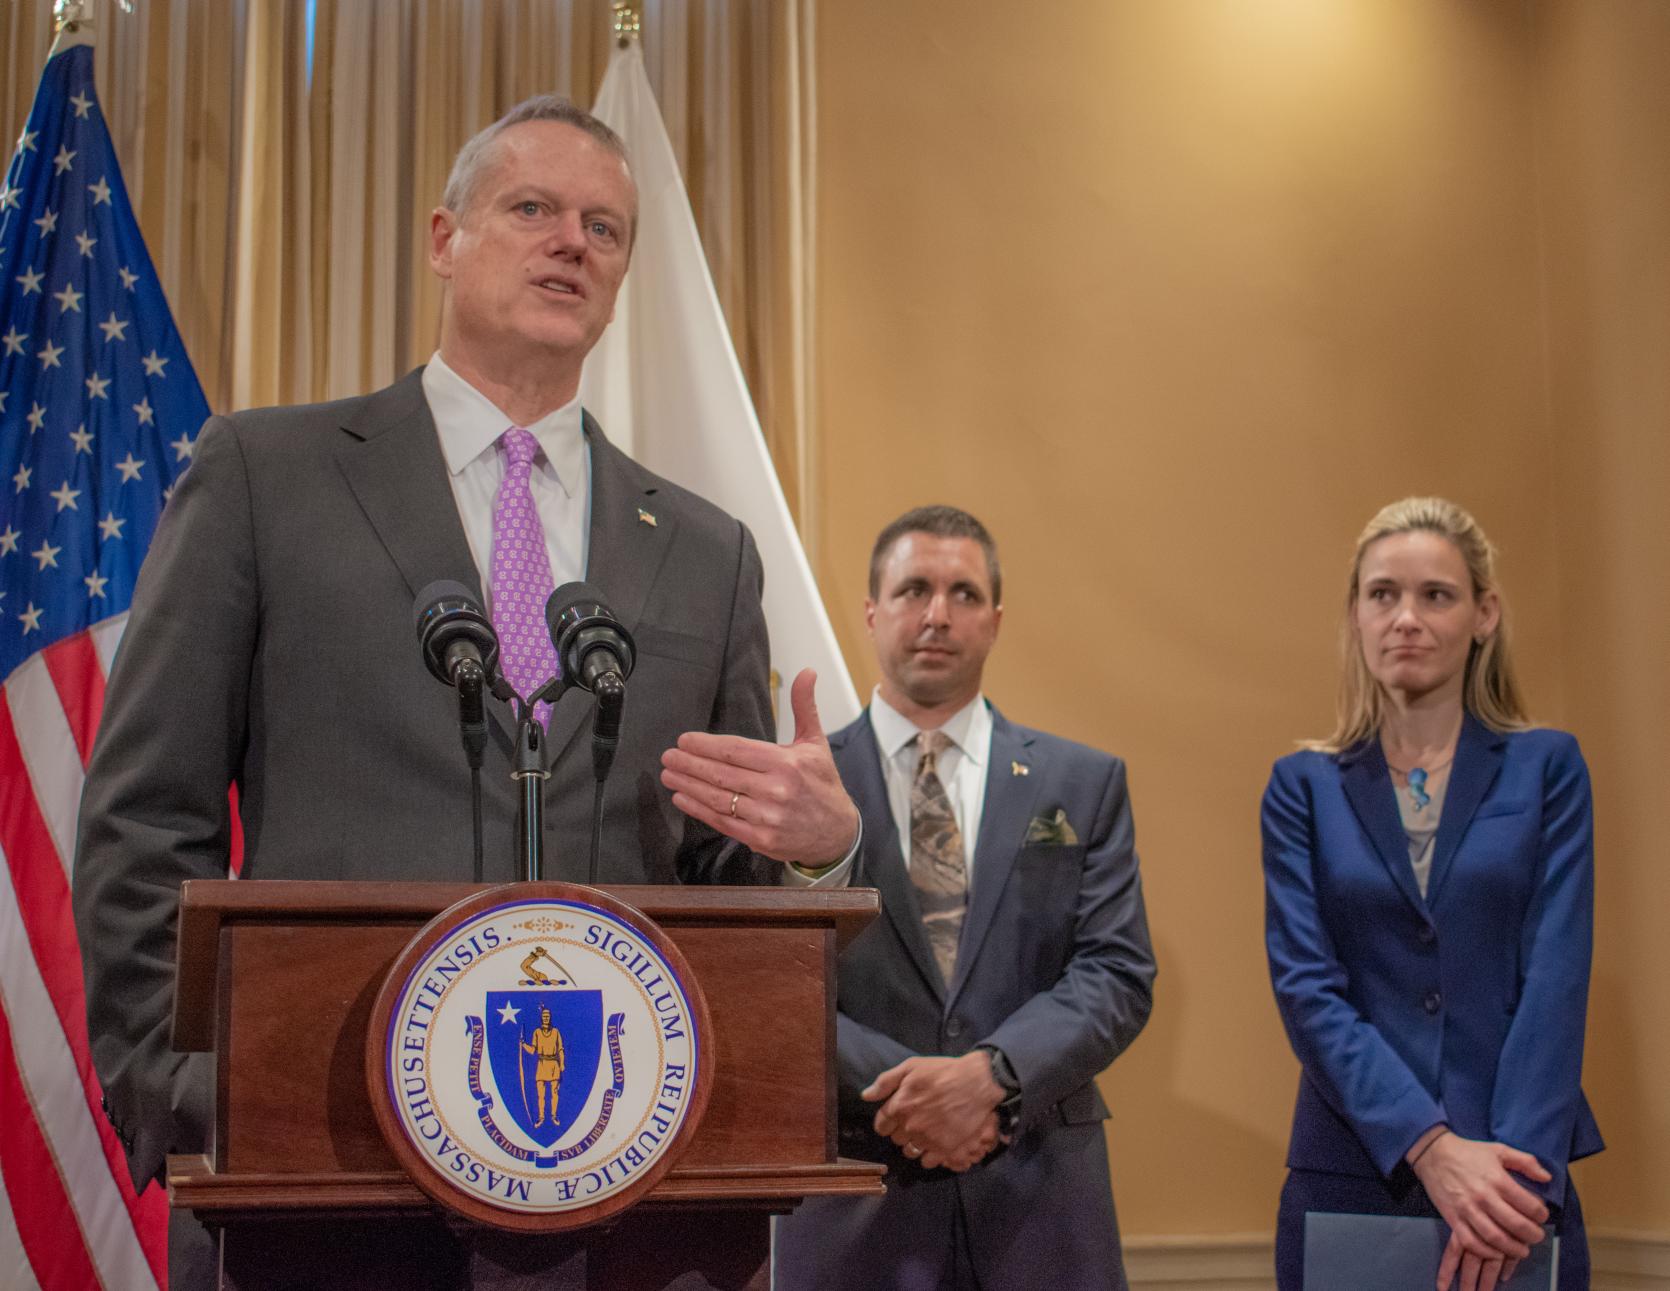 Governor Baker Announces New Secretary of the Executive Office of Energy and Environmental Affairs